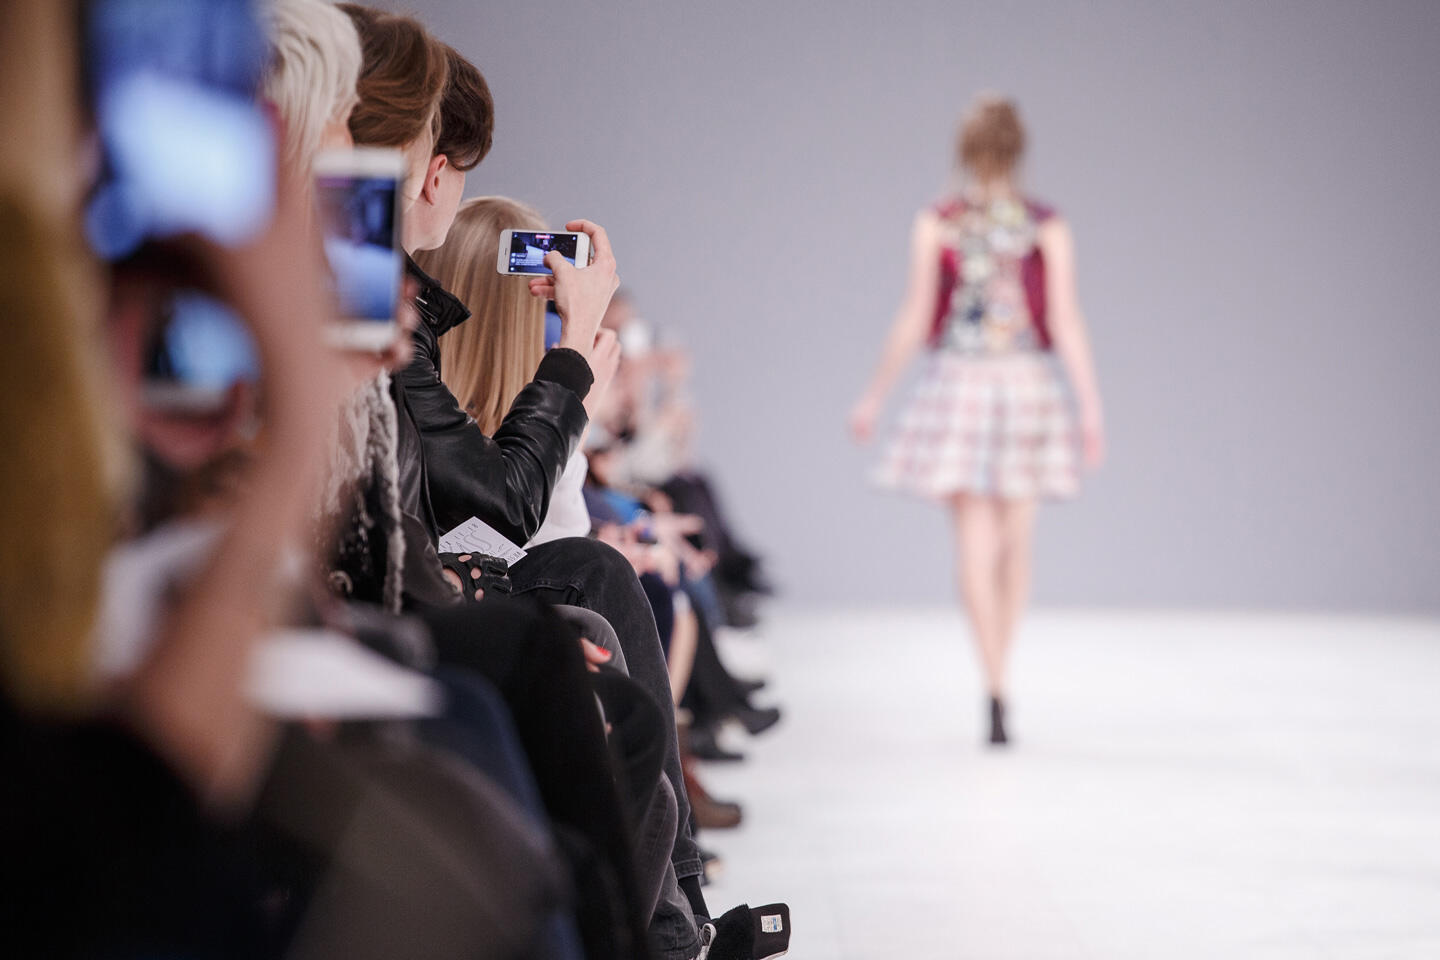 Audience members capturing a fashion show on their smartphones at Paris Fashion Week. In the foreground, a row of seated people, some snapping photos of a model in a short, colorful dress walking on the illuminated runway.